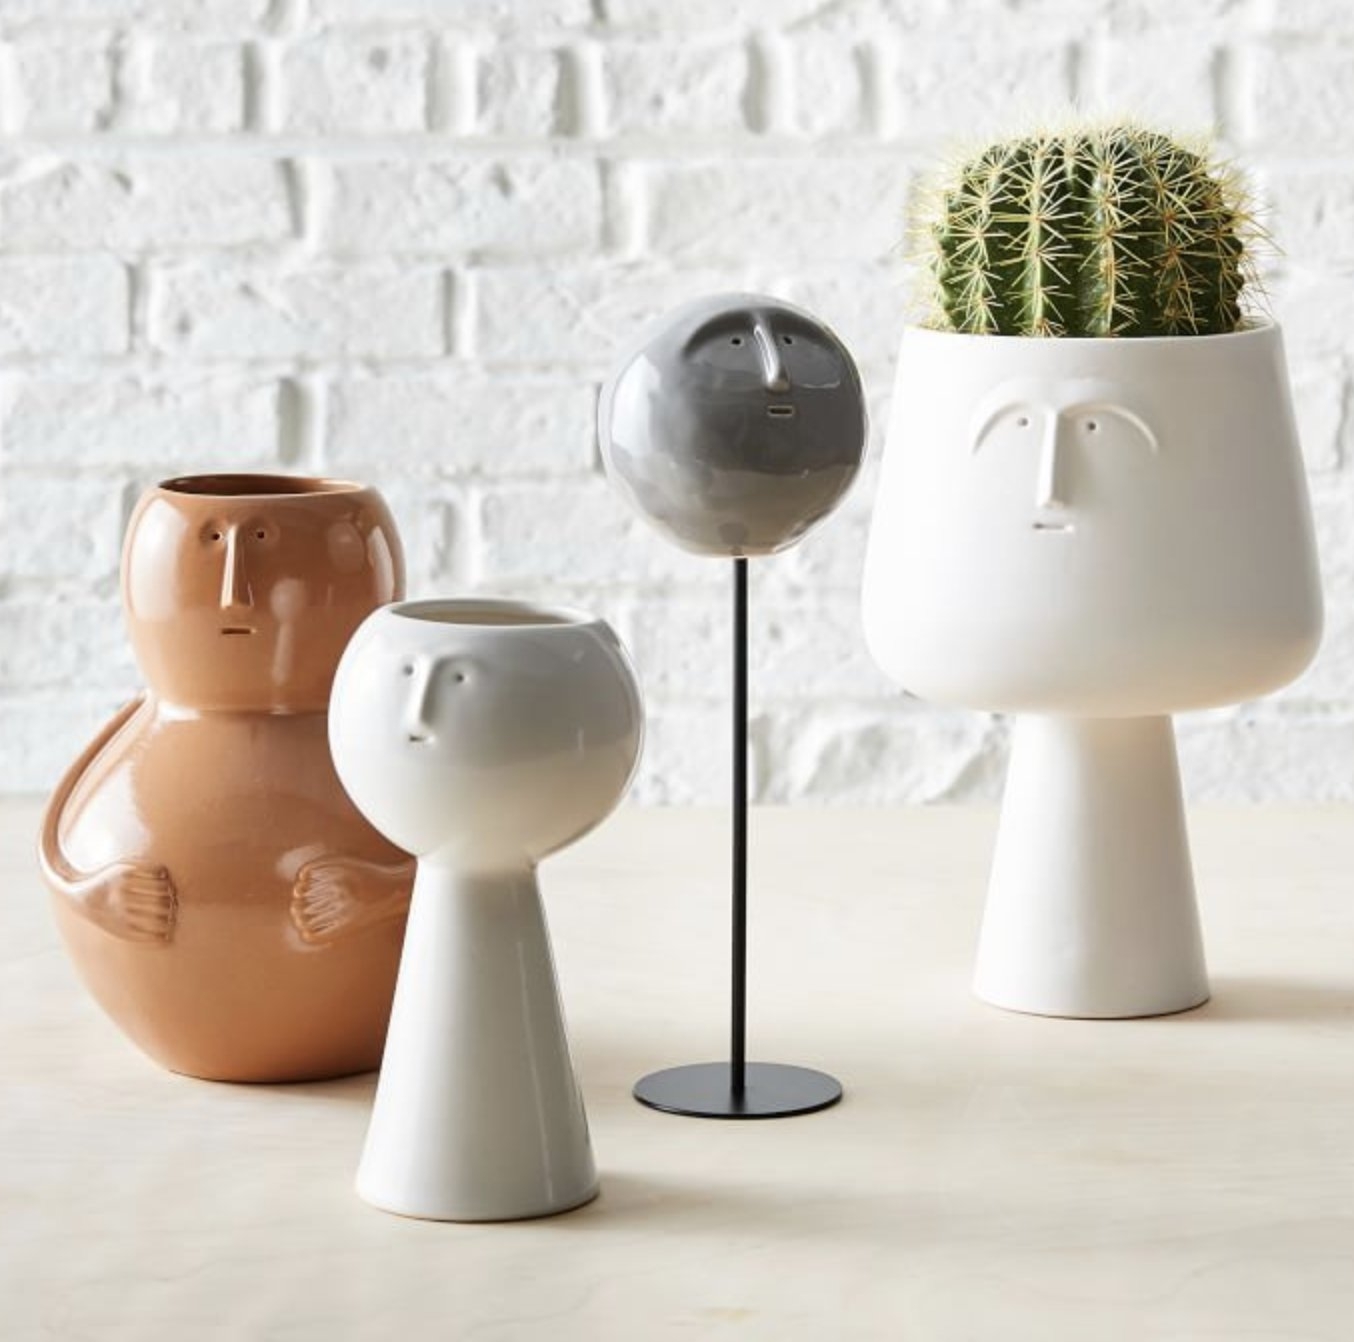 Claymen Vases & Objects - Image 1